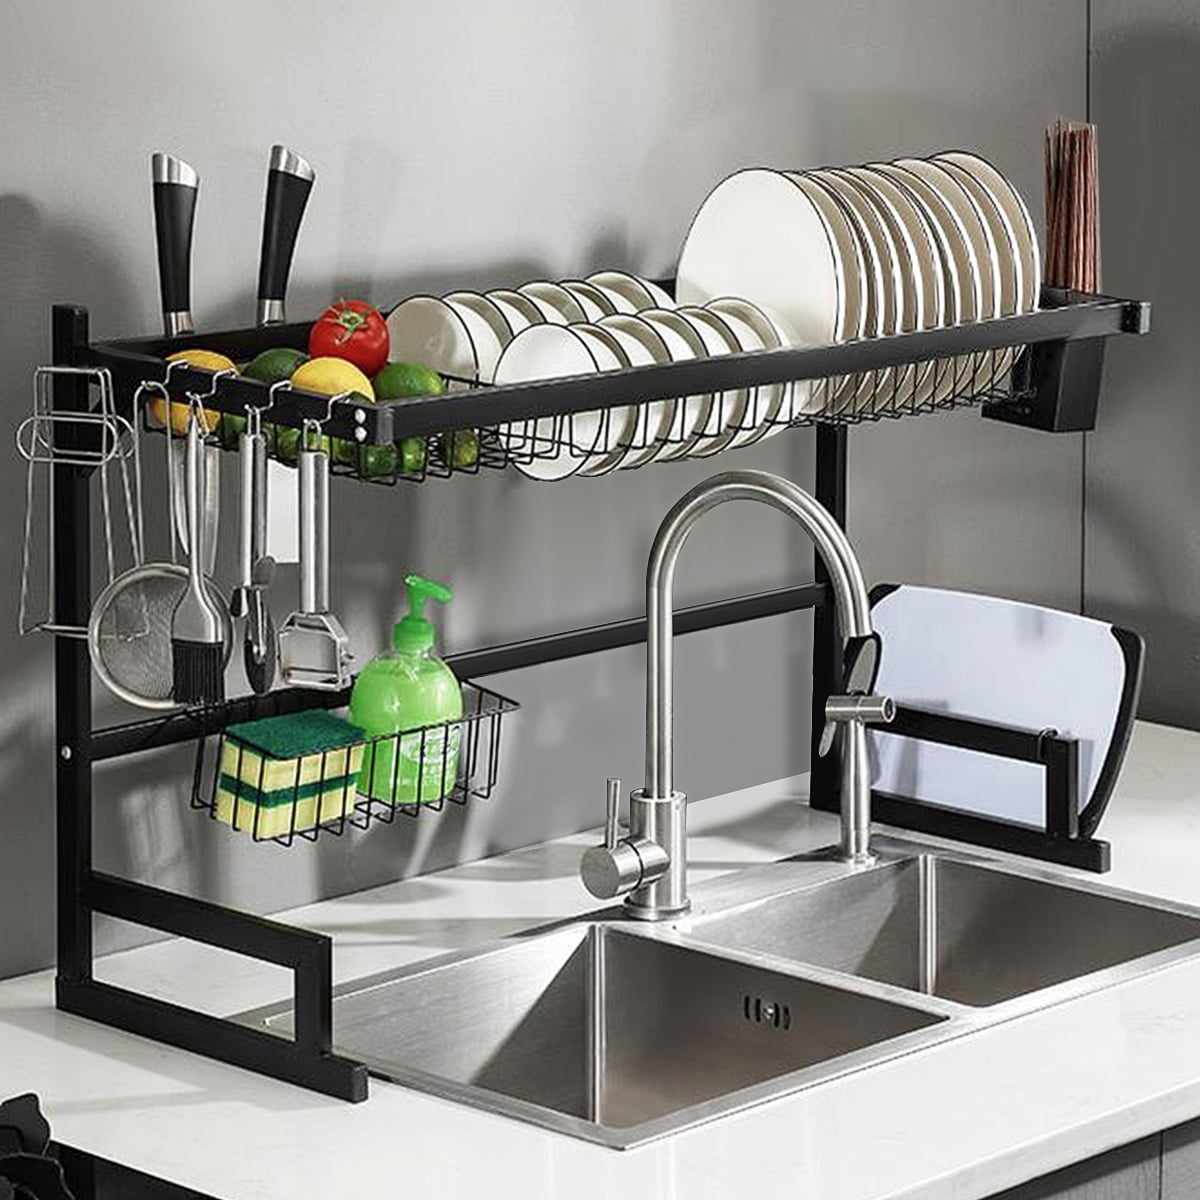 Stainless Steel 2 Tier Dish Drying Rack - Over Sink, Drainer Shelf Stainless Steel 2 Tier Dish Rack